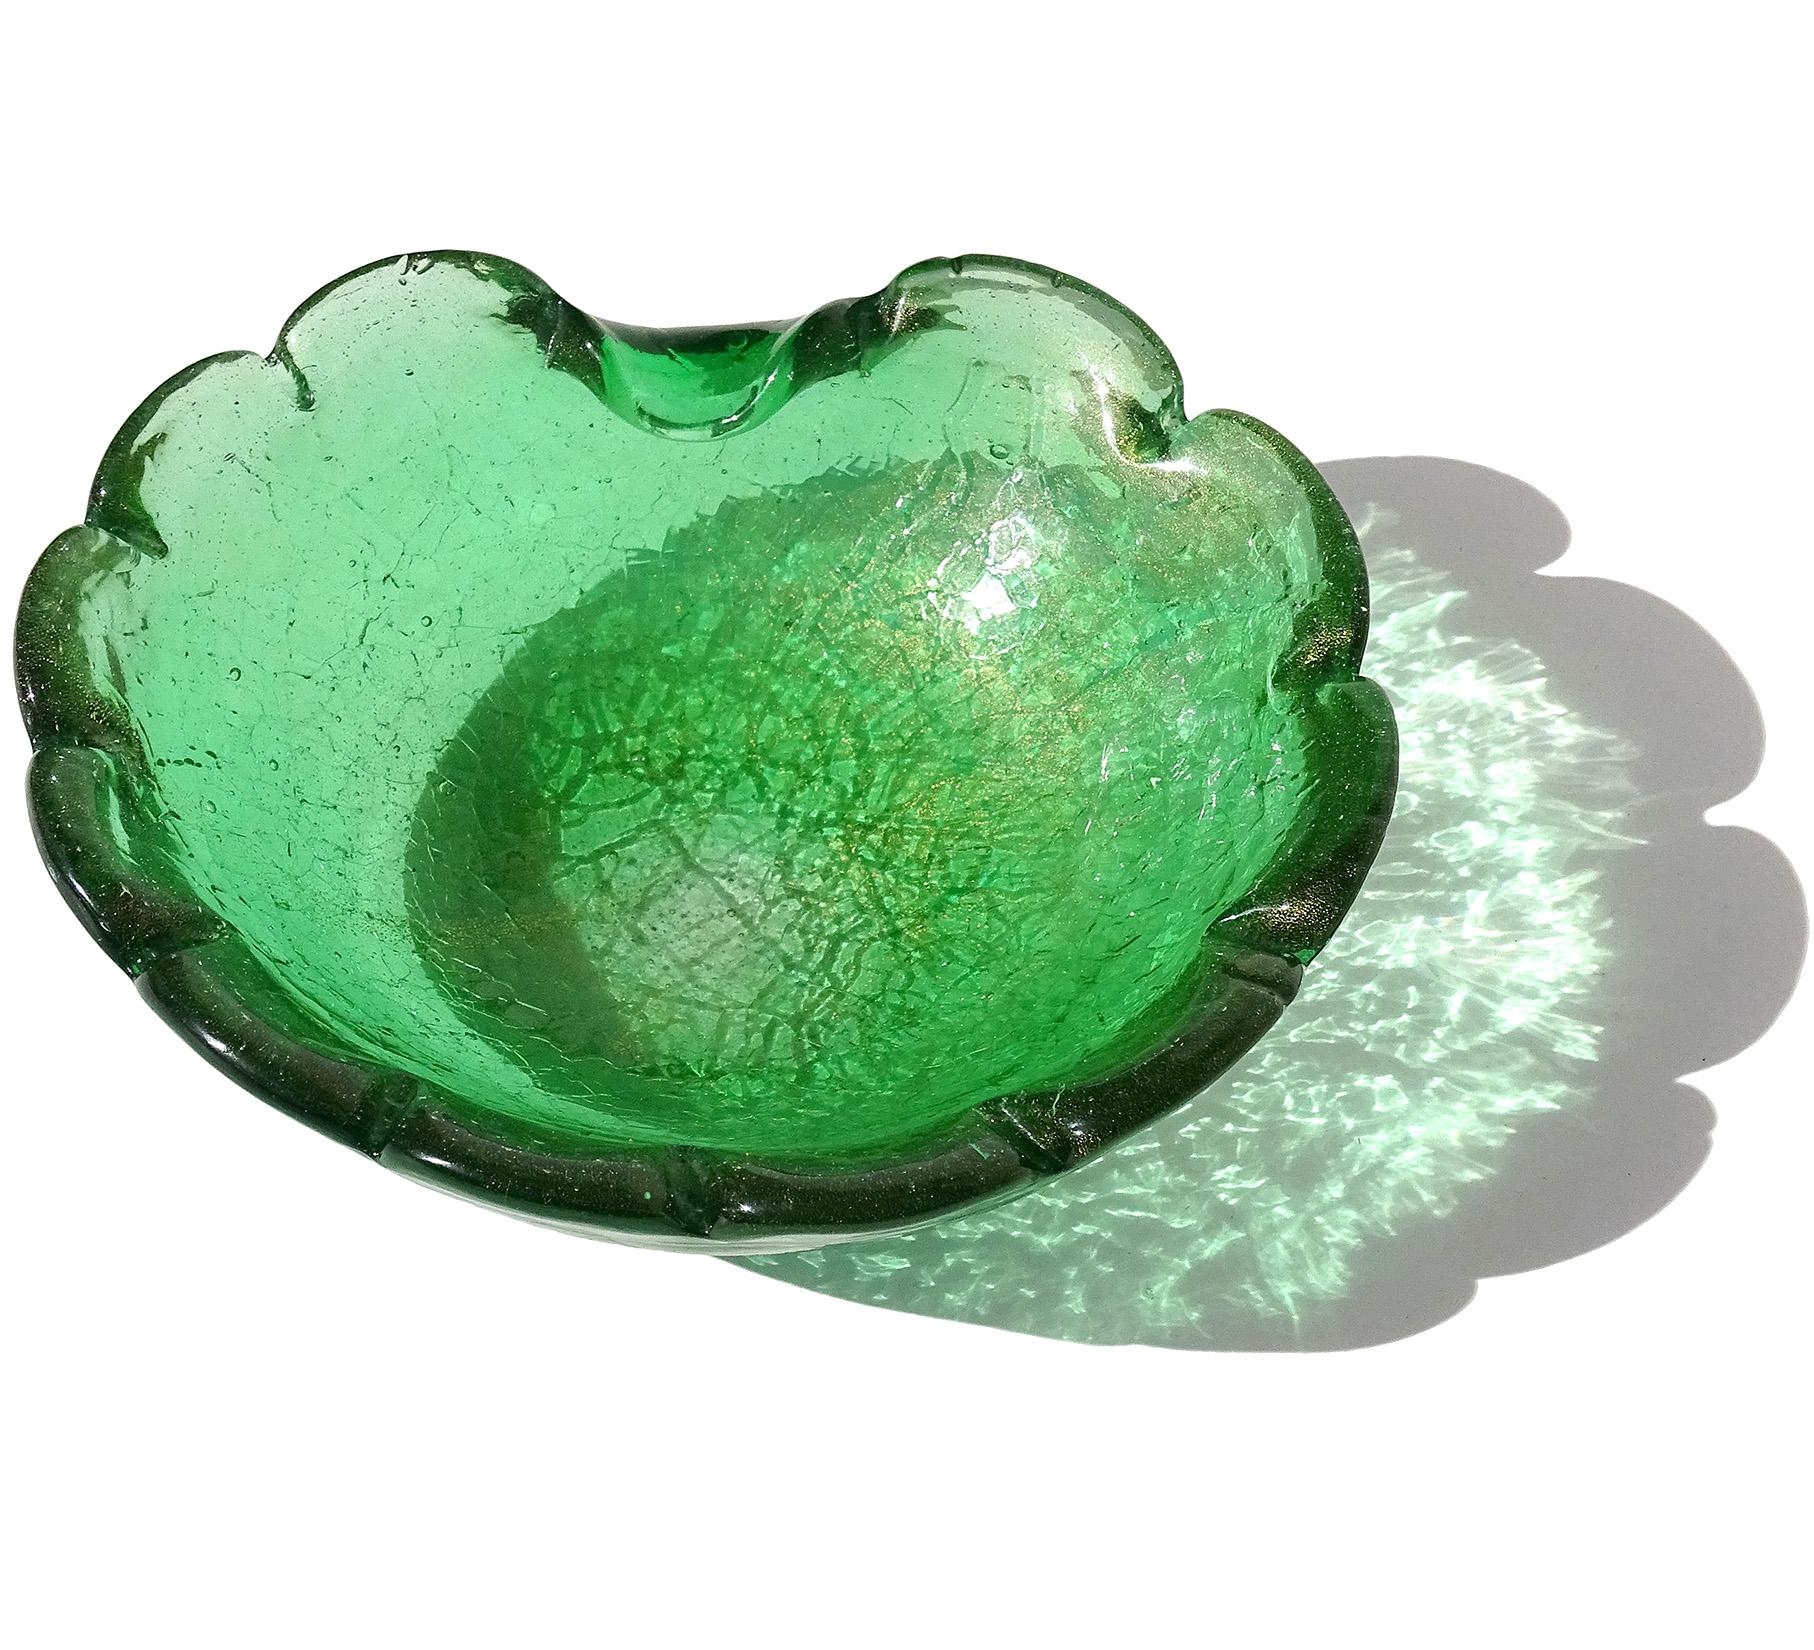 Beautiful vintage Murano hand blown green, crackle surface and gold flecks Italian art glass bowl. Created in a crackle glass surface pattern with scallop design on the rim. The piece has a decorative indent on the rim that could be used as a